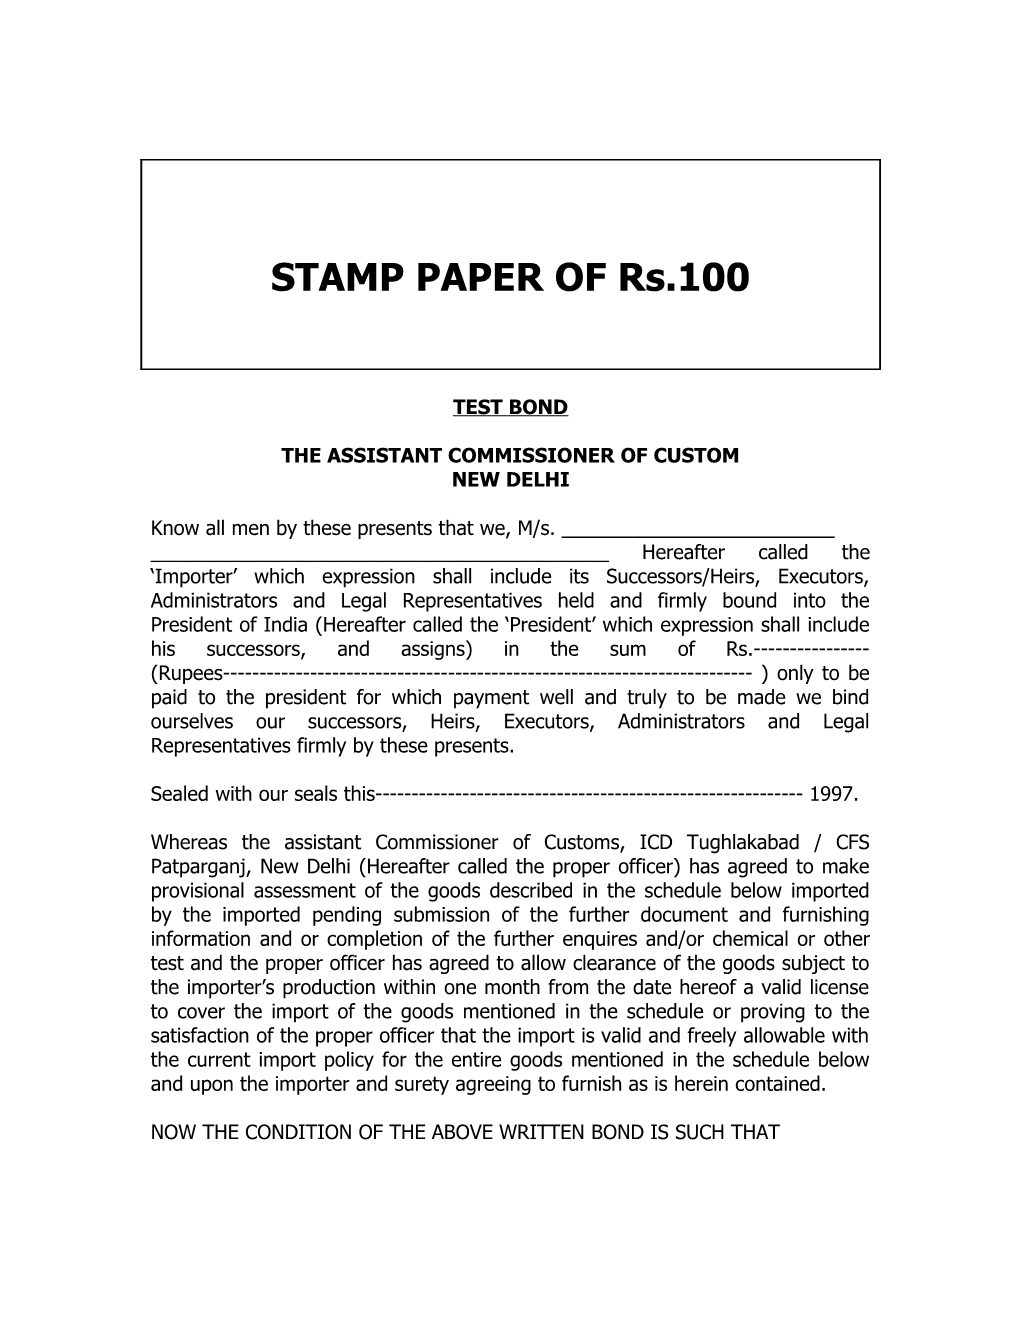 STAMP PAPER of Rs